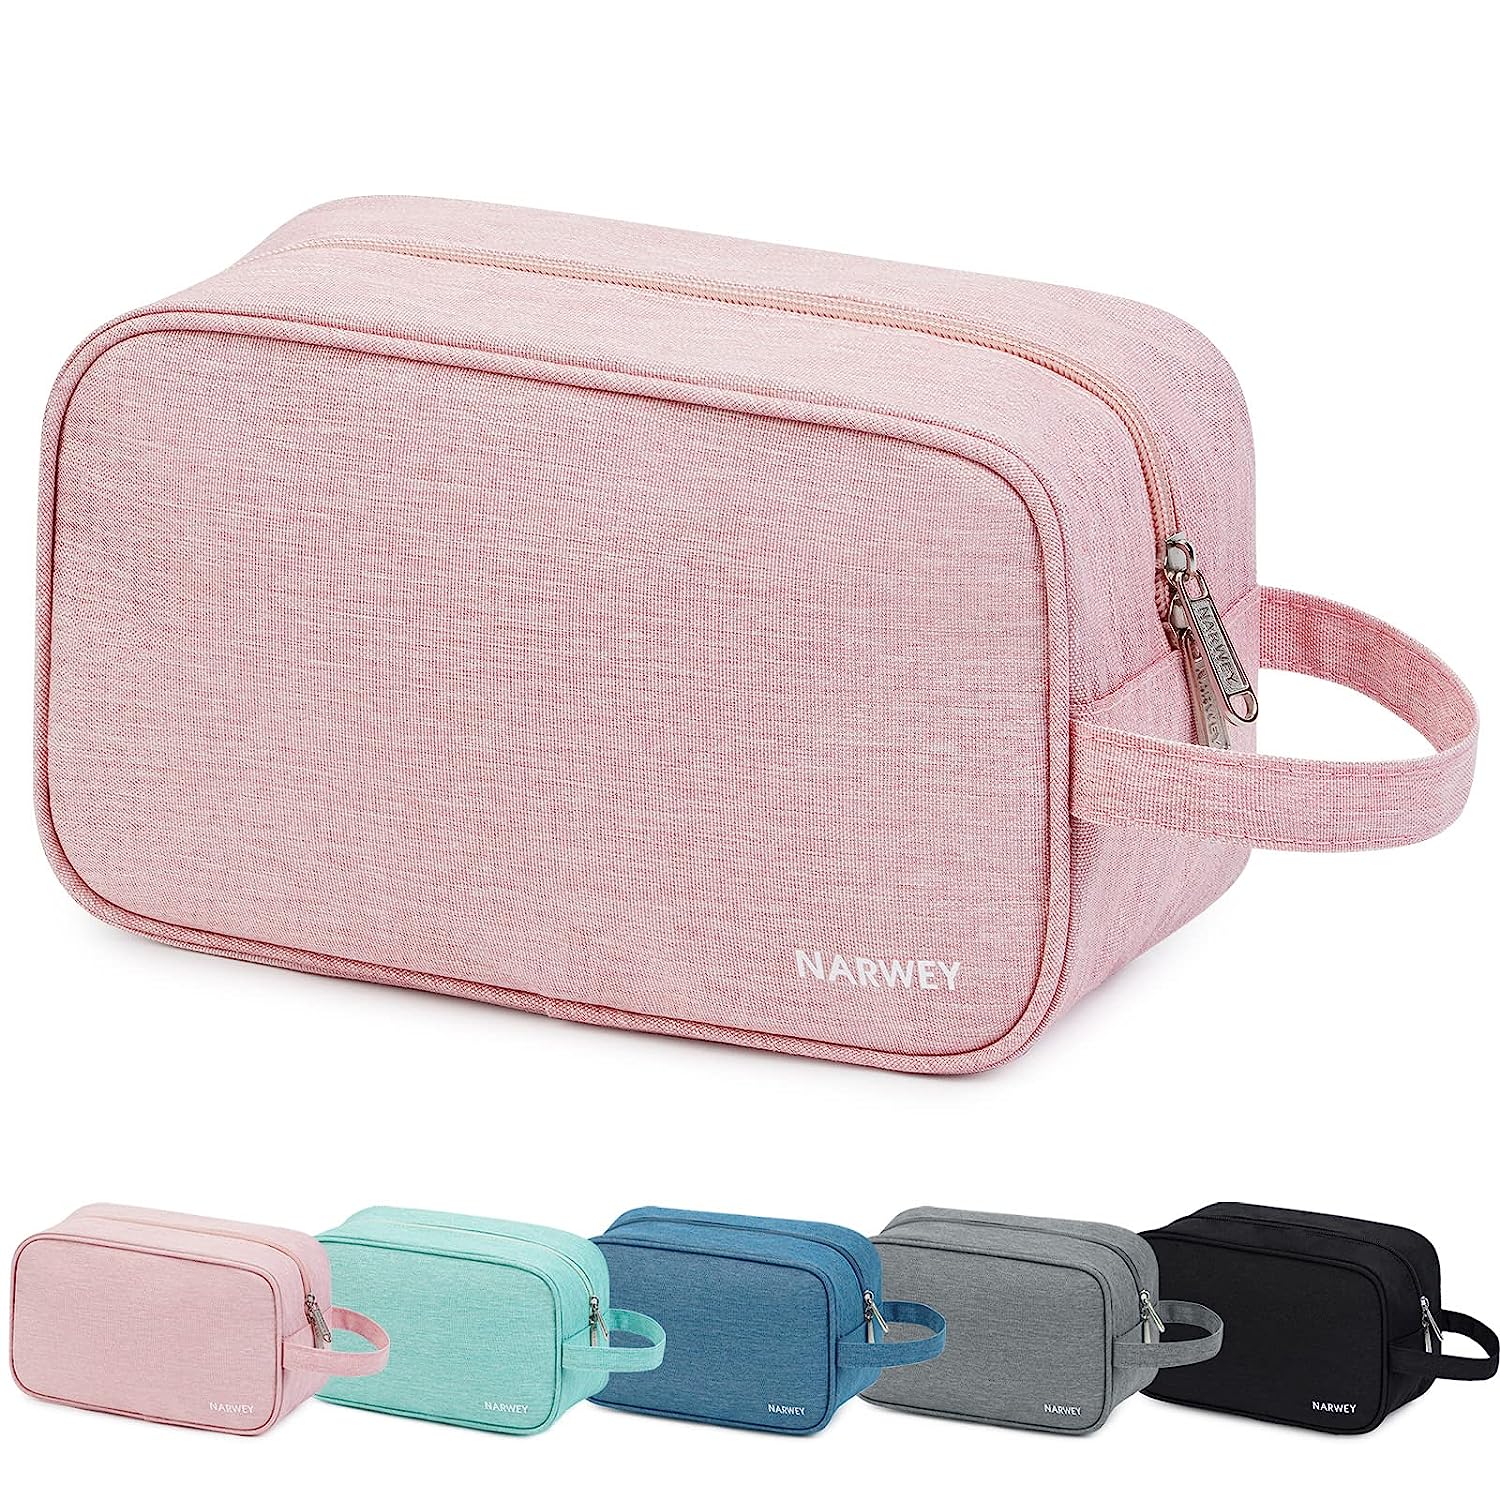 Narwey Travel Toiletry Bag for Women Pink